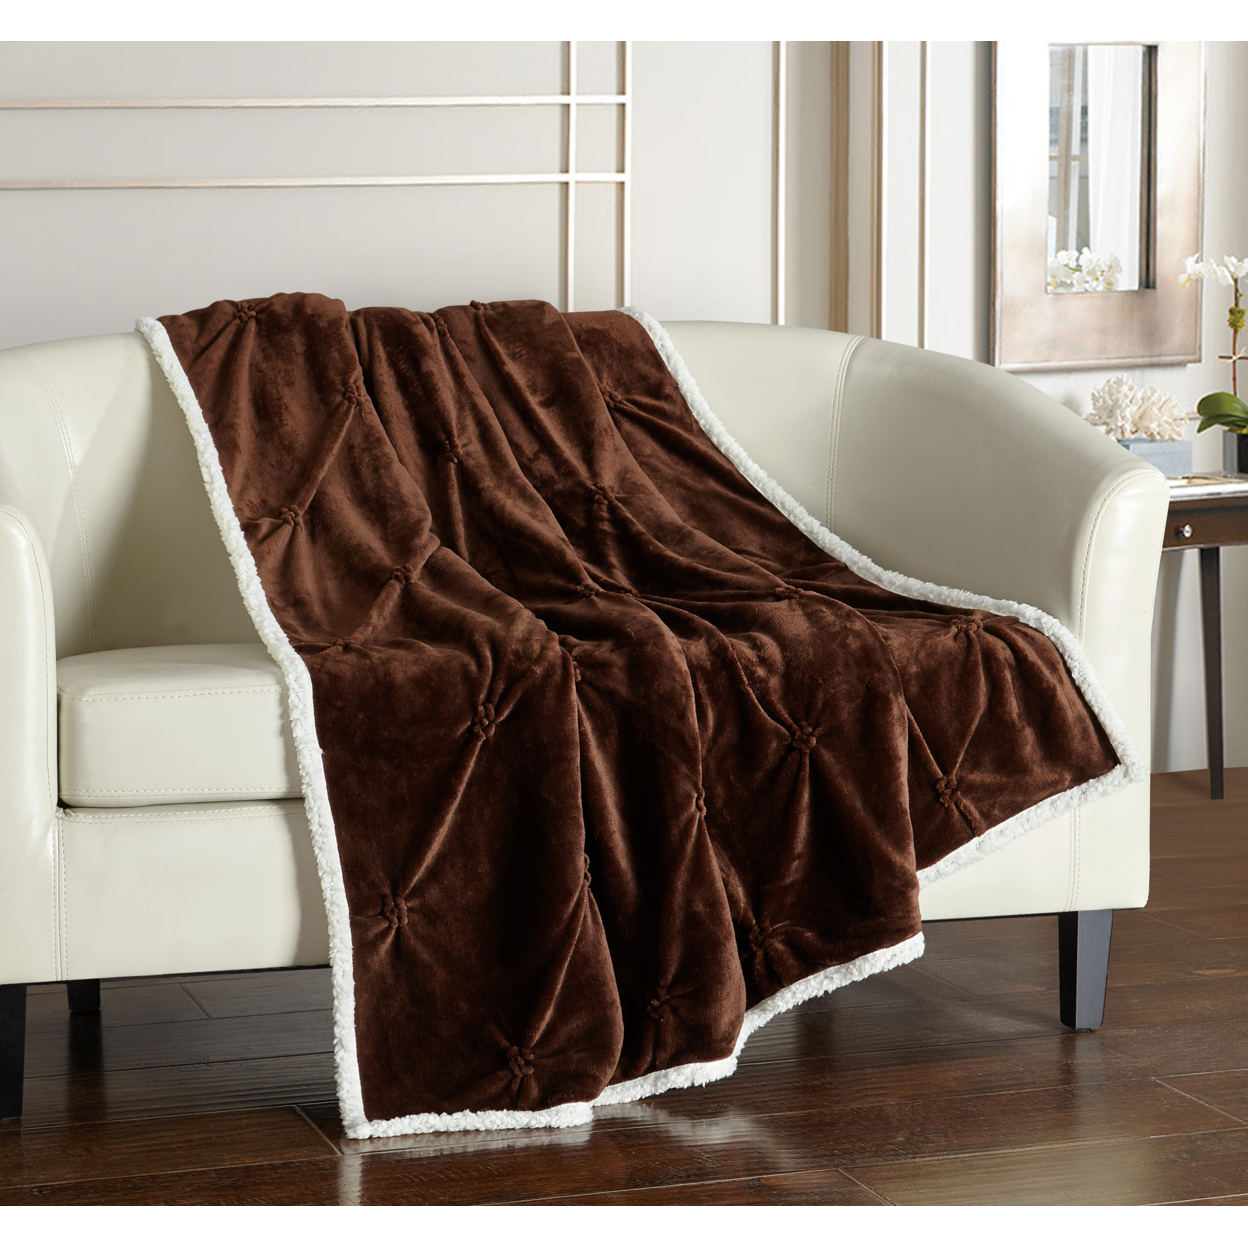 Chic Home Alejandro Throw Blanket Cozy Super Soft Ultra Plush Micromink Sherpa Backing Grey 50X60 - Brown